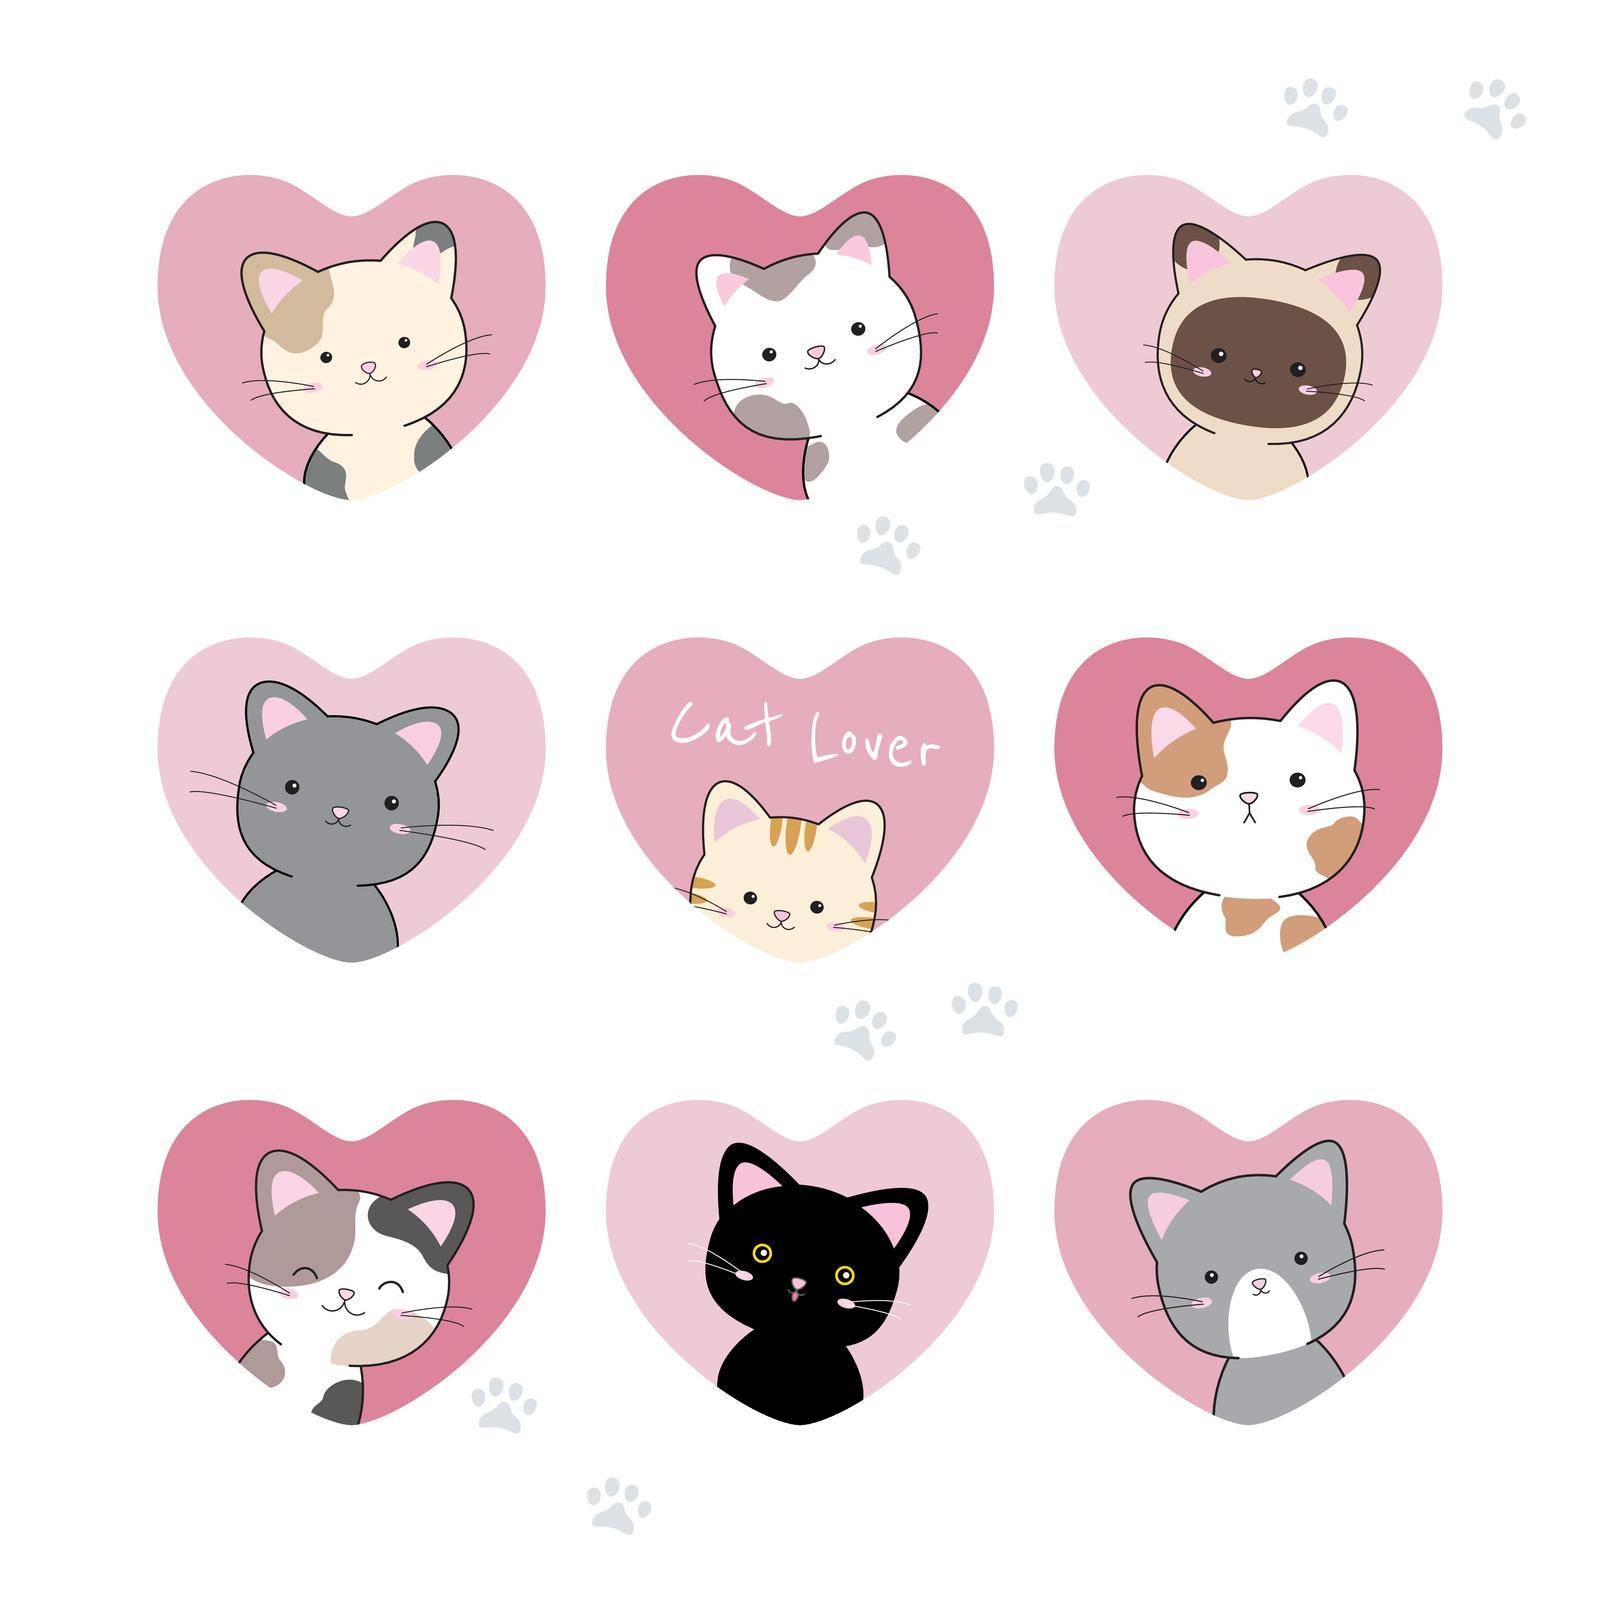 Cat in heart on white background Valentine's day vector illustration by Myimagine